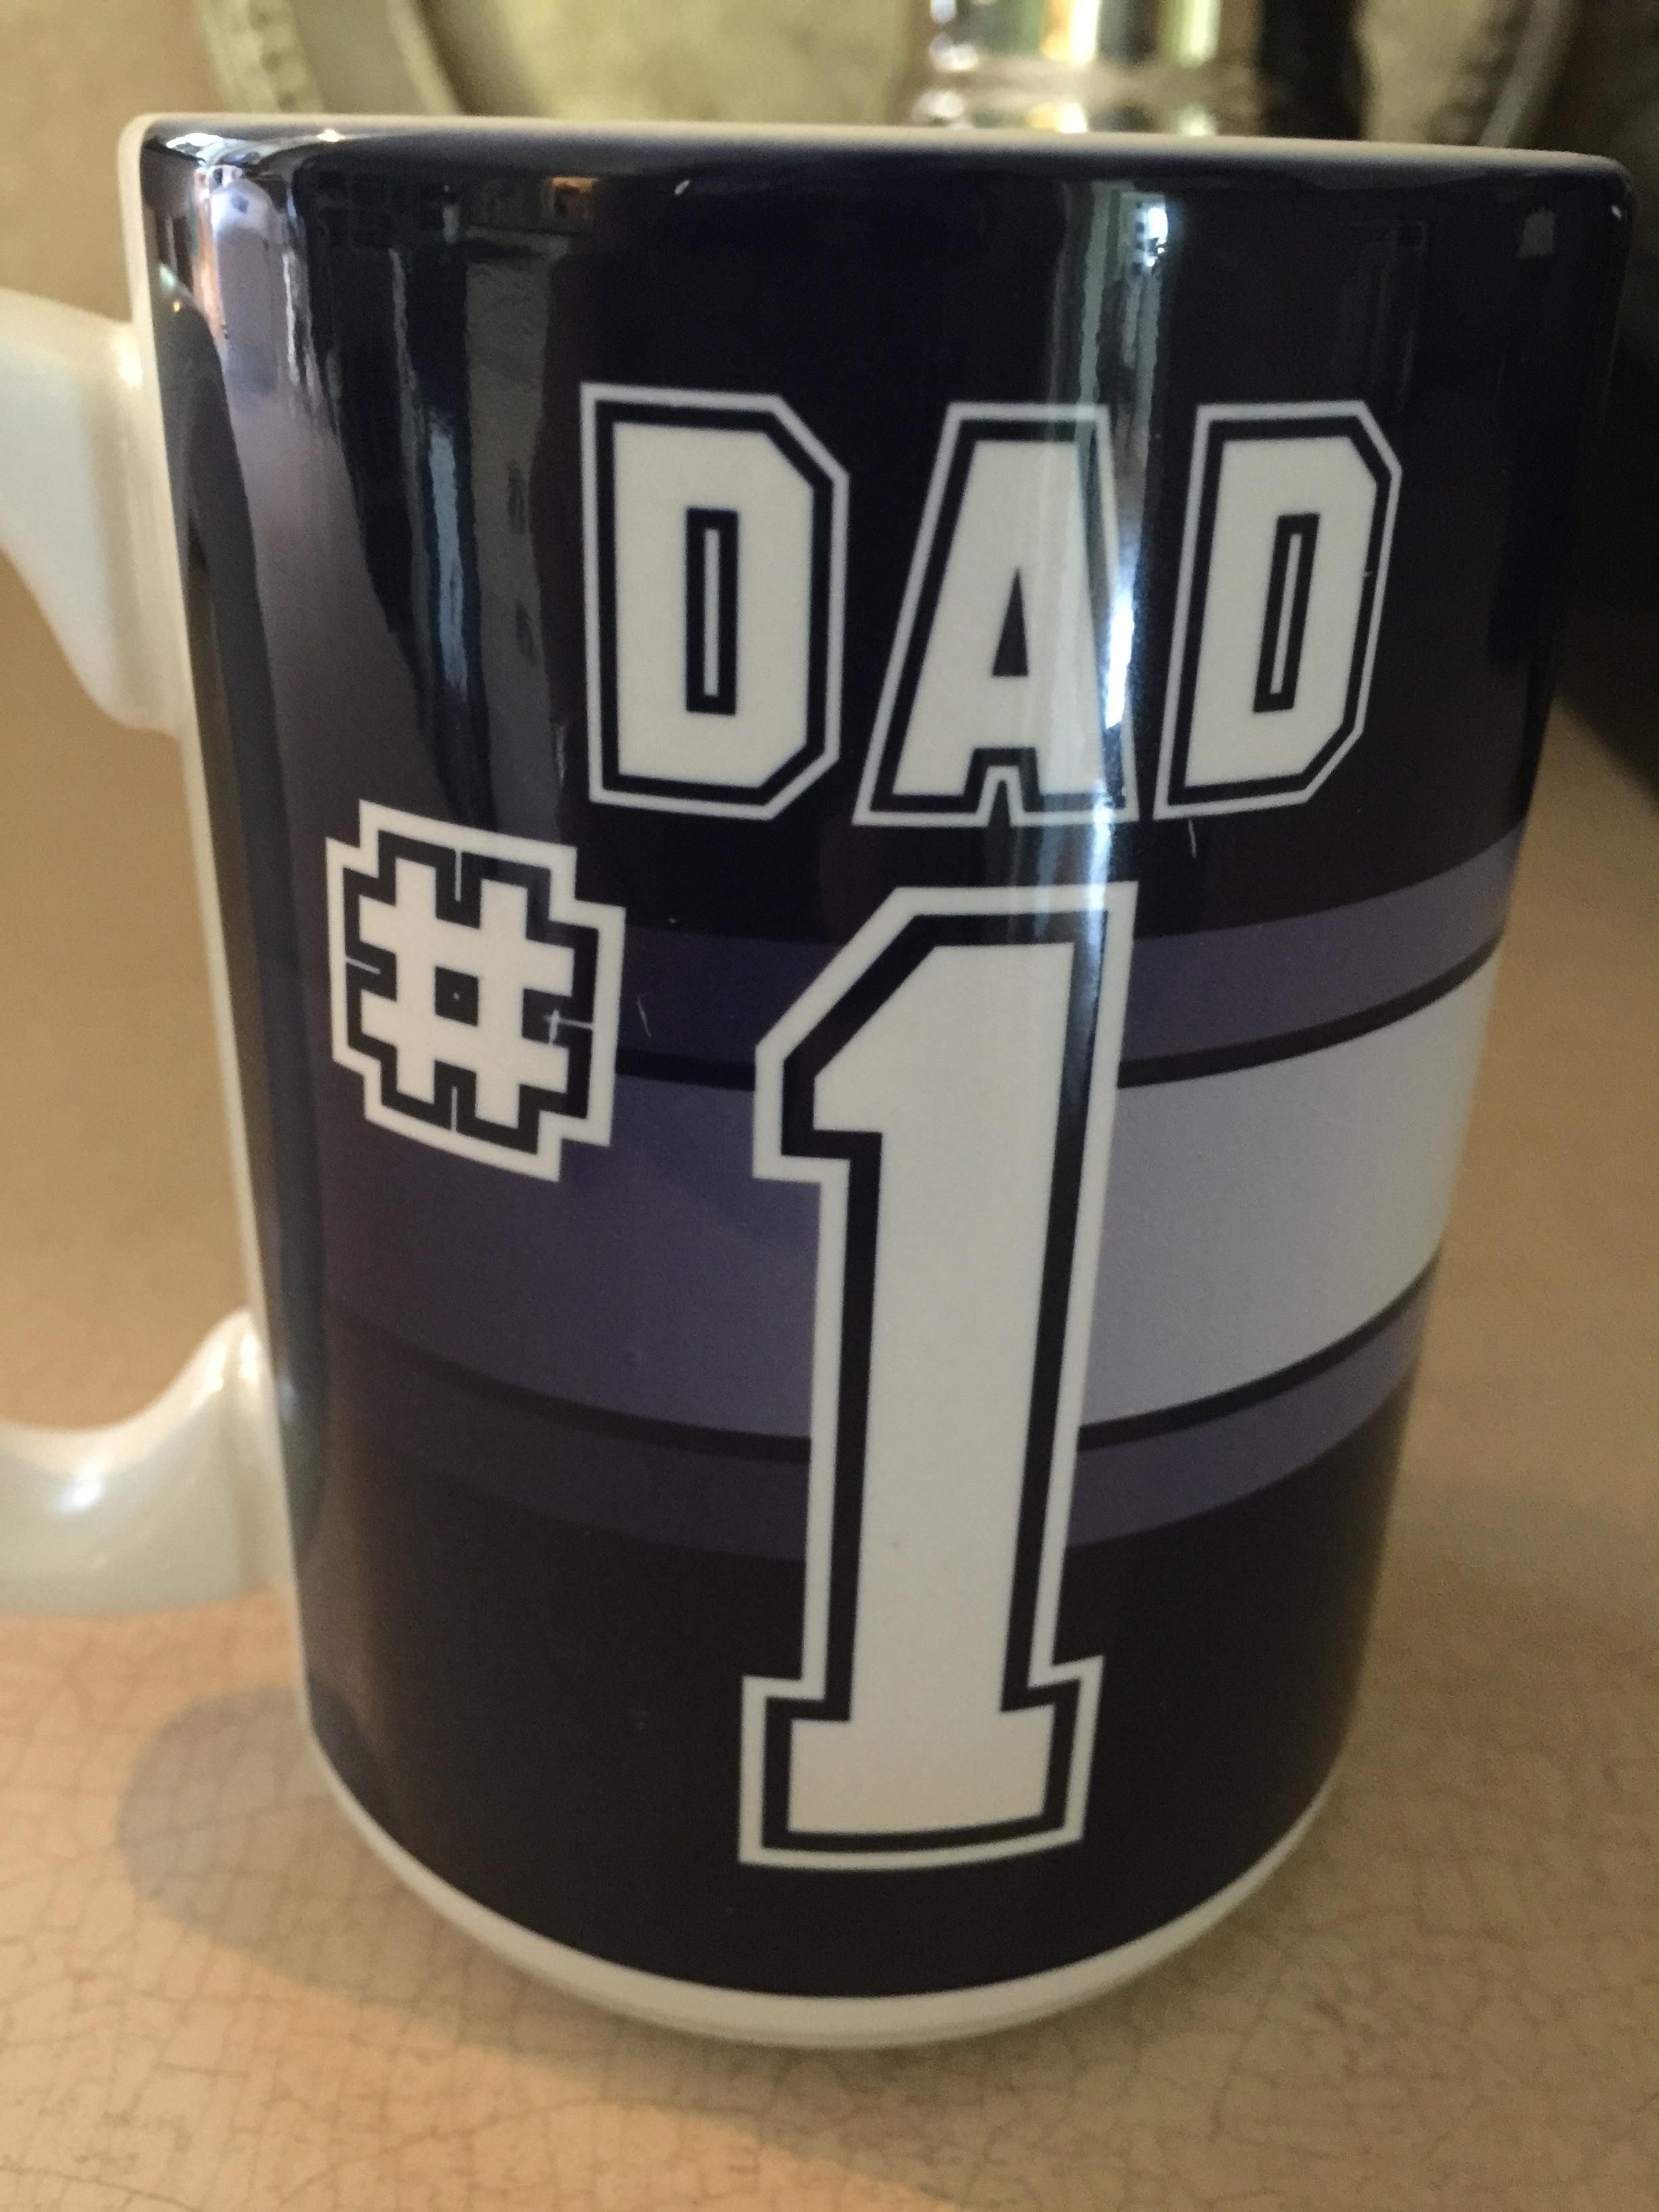 For a year I read this as #1 Dad, but just realized I'm only Dad #1